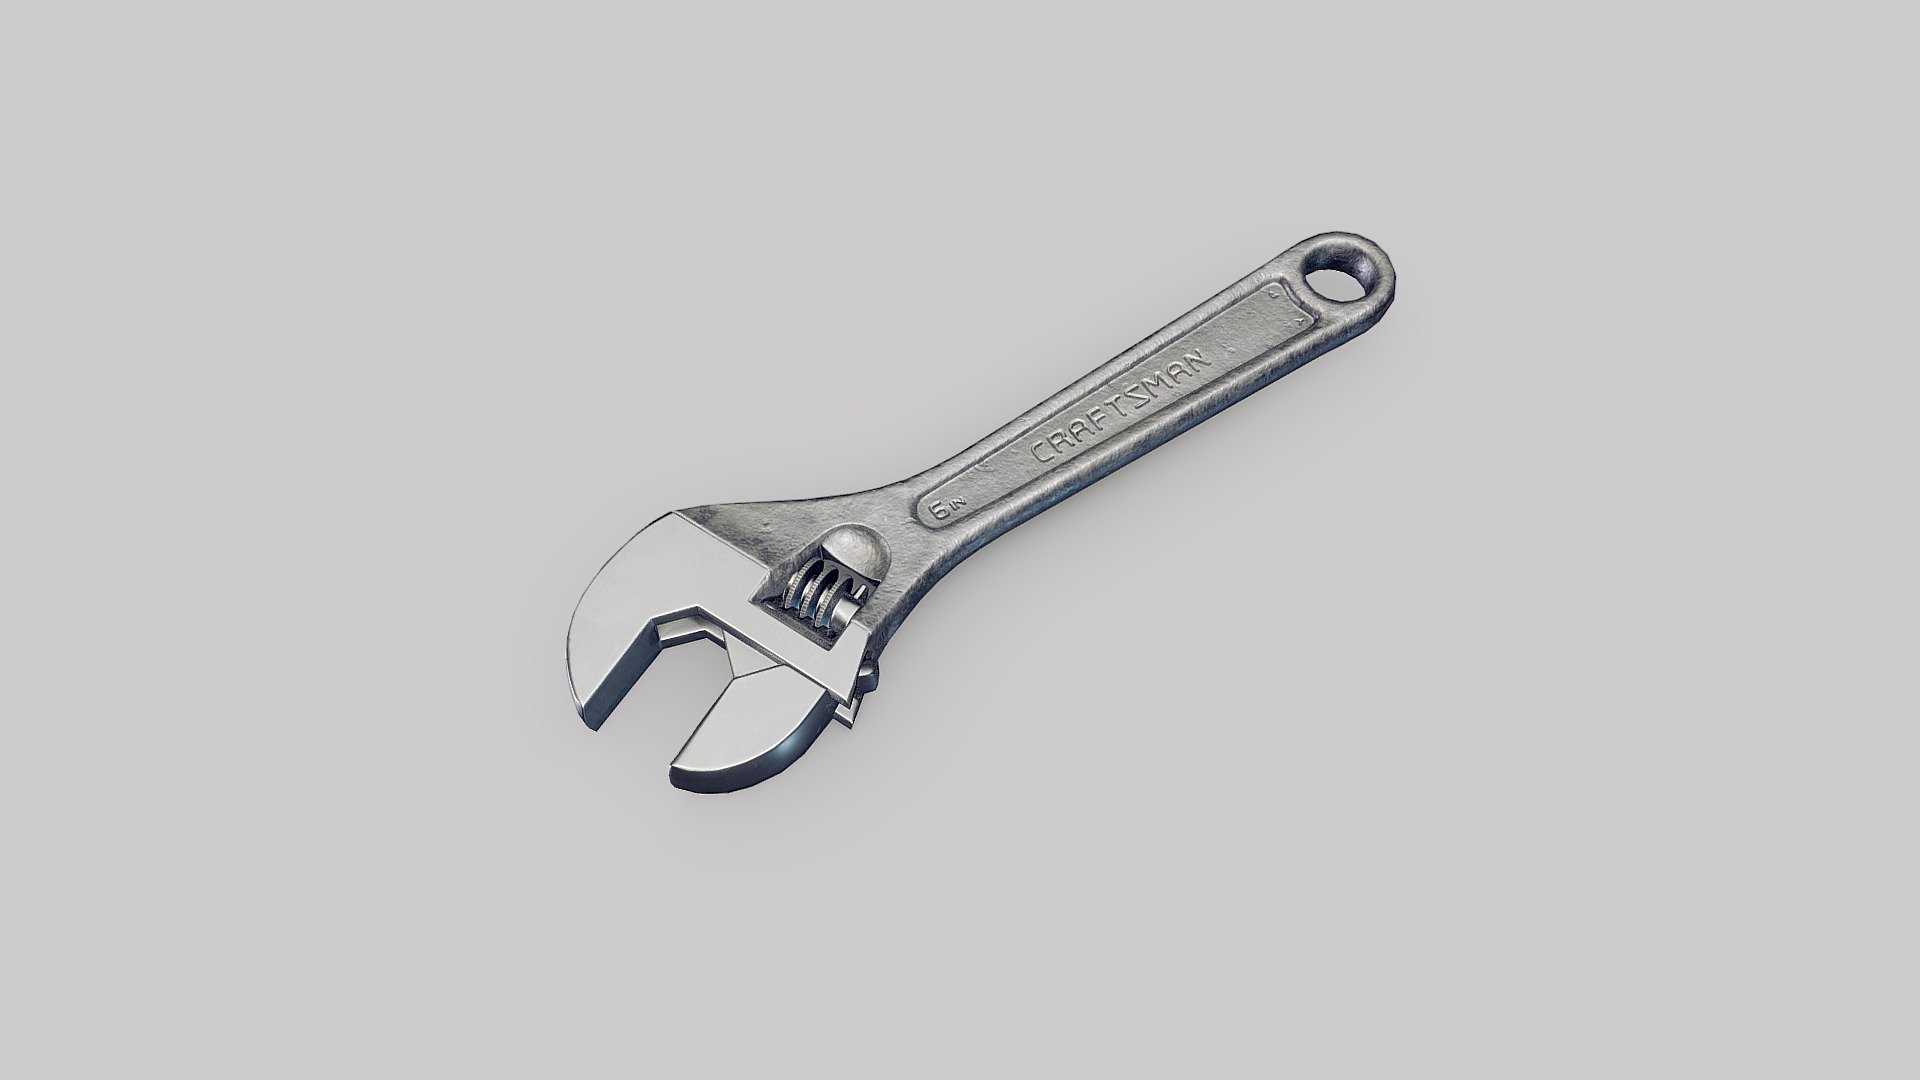 I hope you enjoy using my wrench on your nuts and bolts 3d model